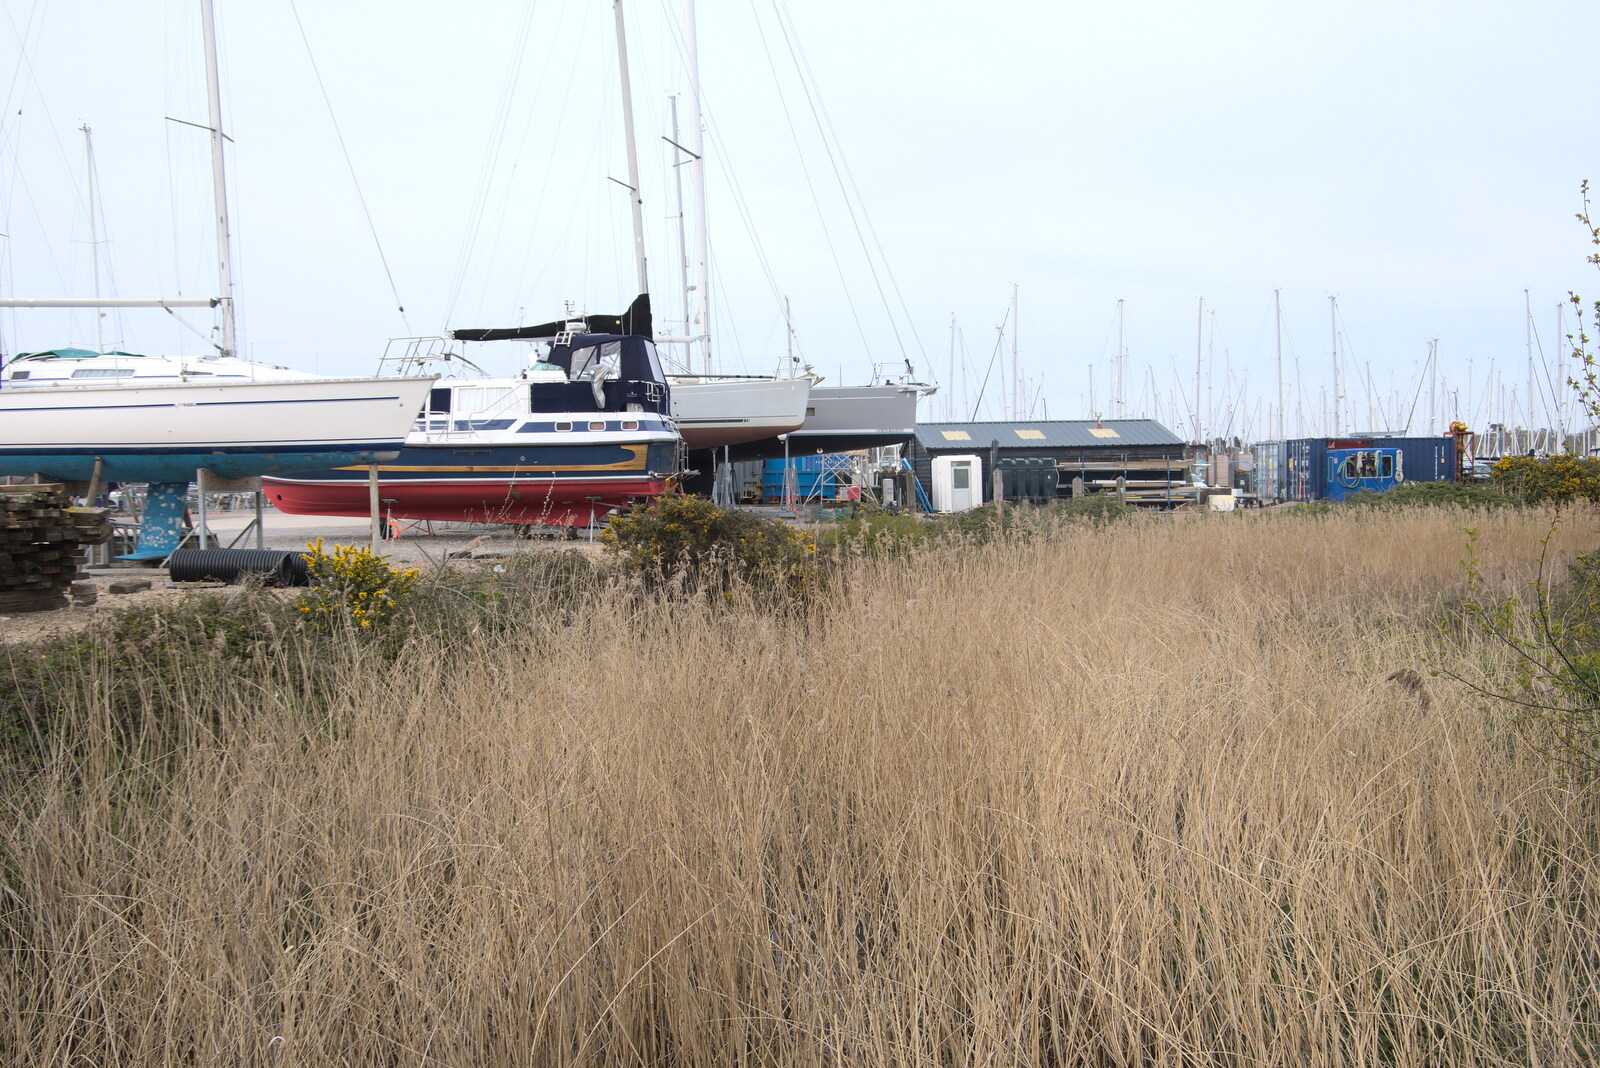 Bernice's Birthday and Walks Around New Milton and Lymington, Hampshire - 10th April 2022: Boats and marshes